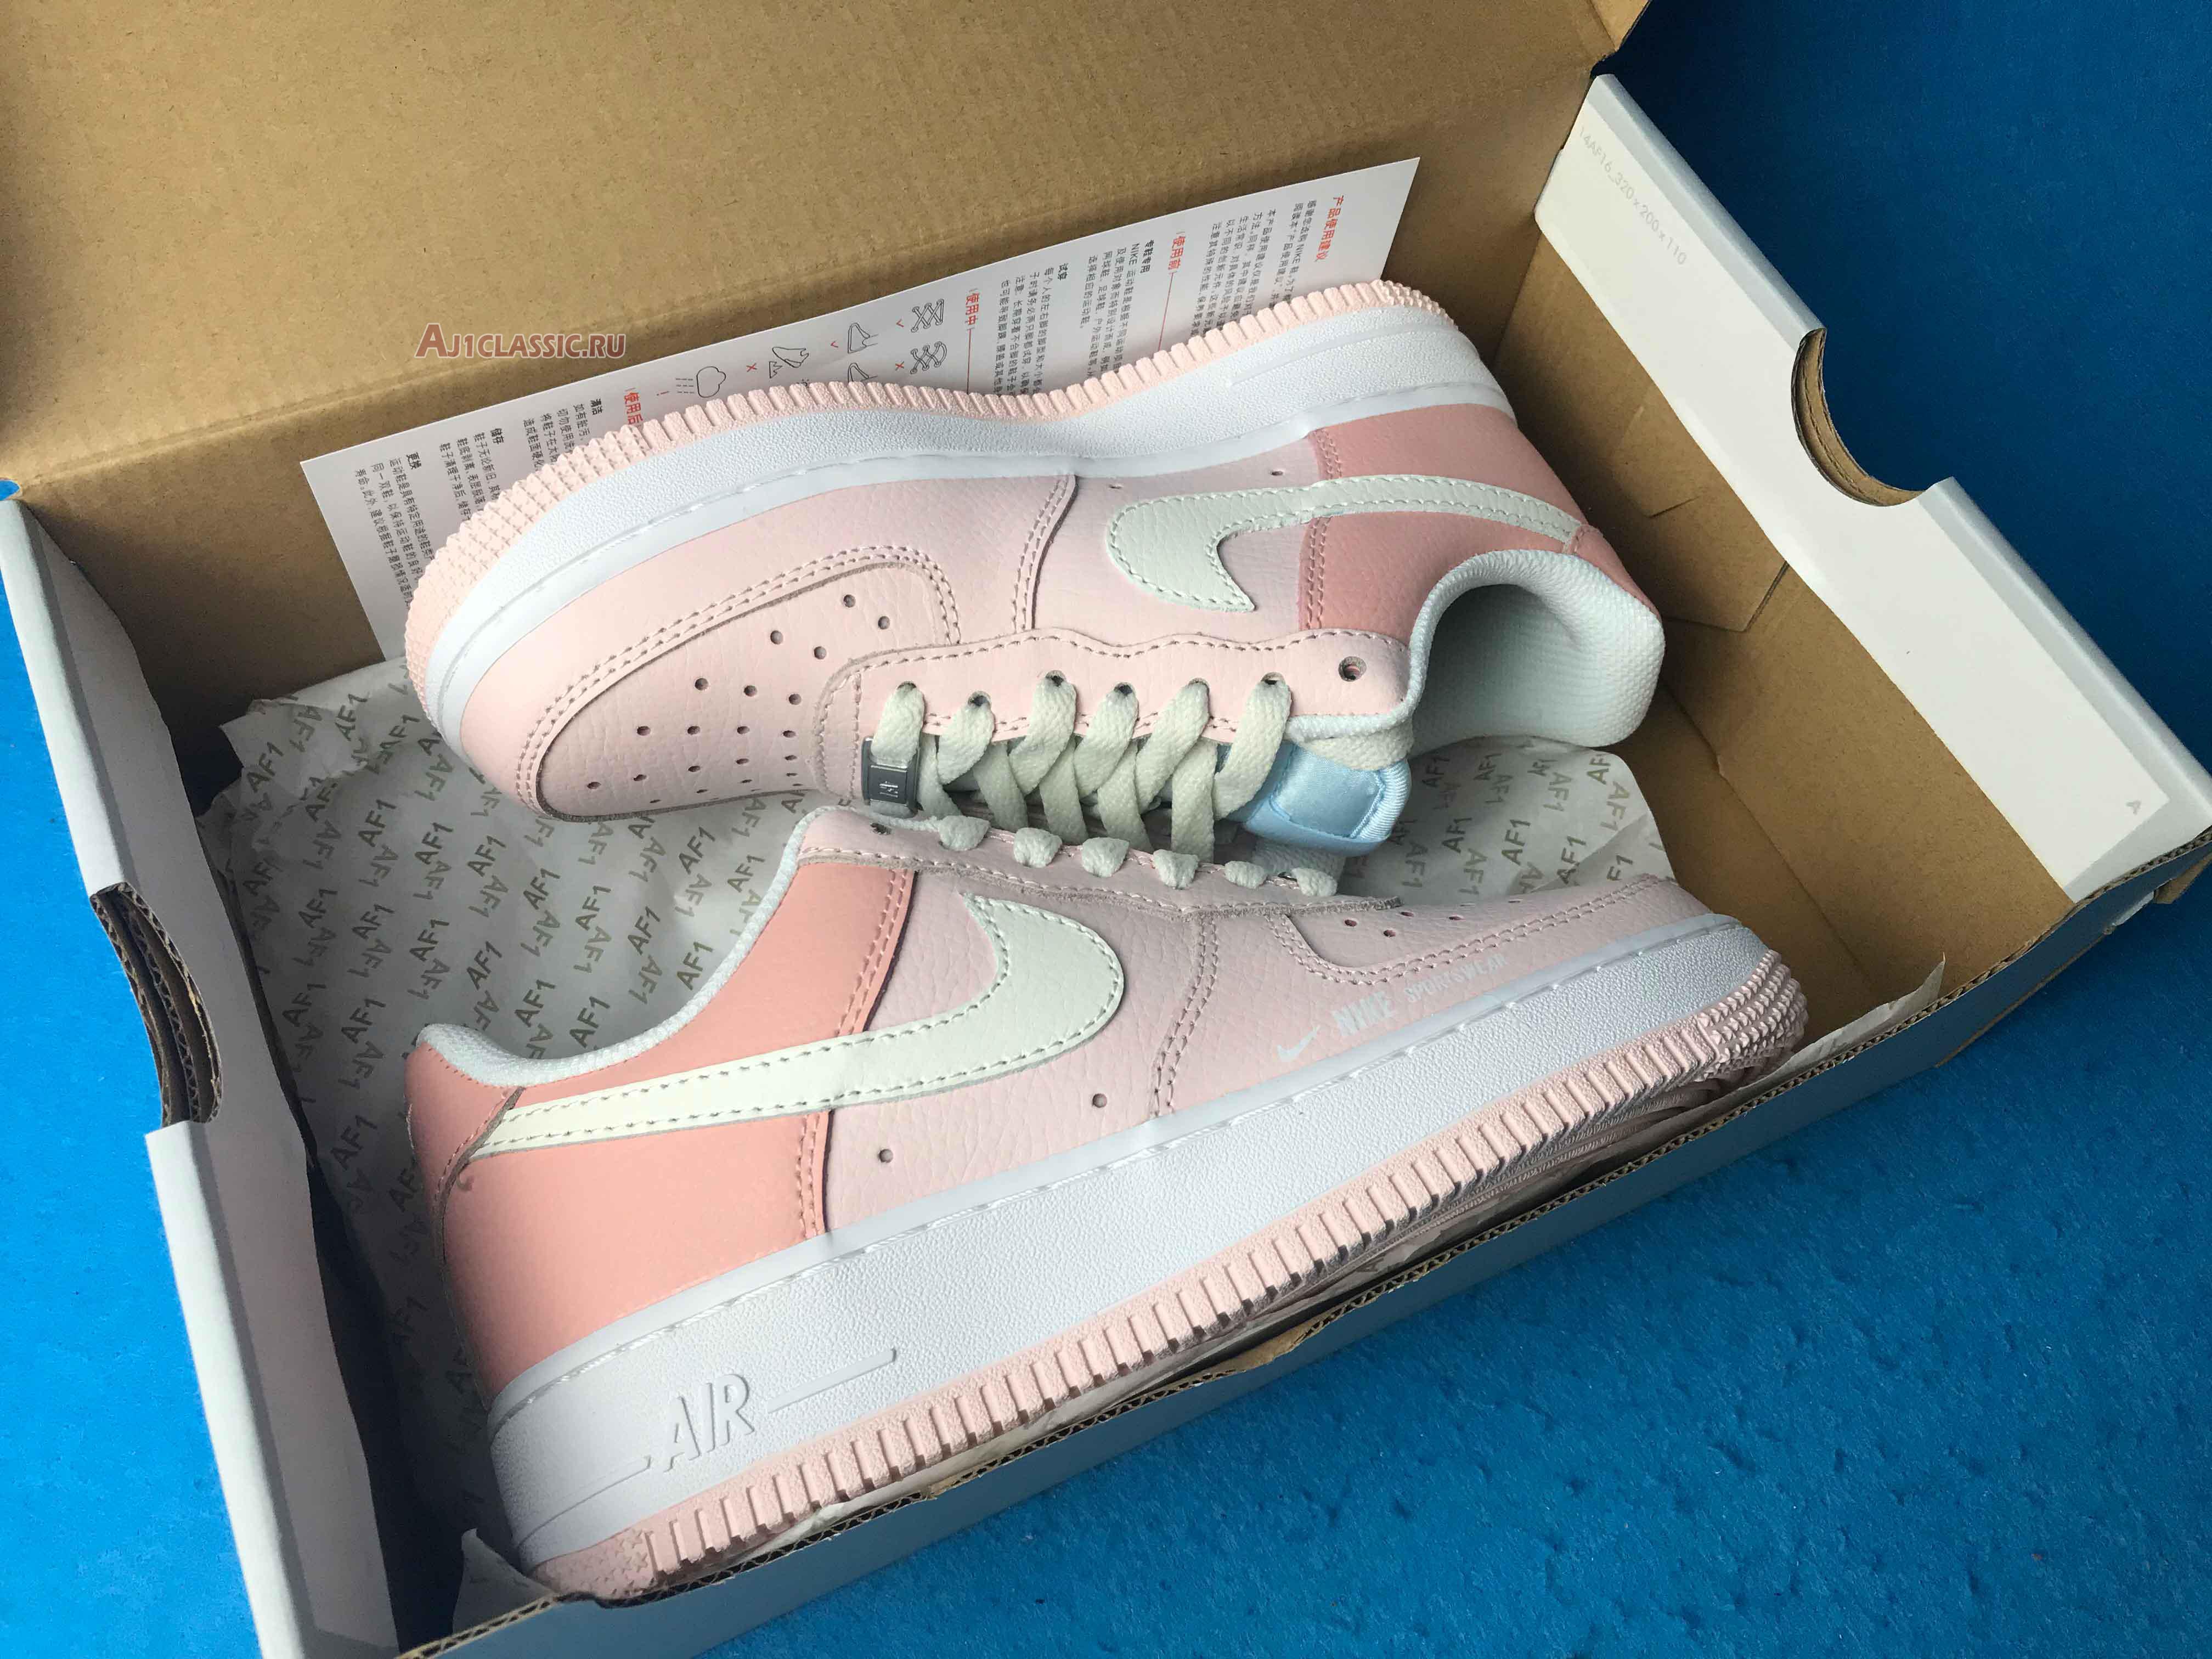 Nike Air Force 1 Low Utility Force is Female CK4810-621 Echo Pink/Sail Sneakers